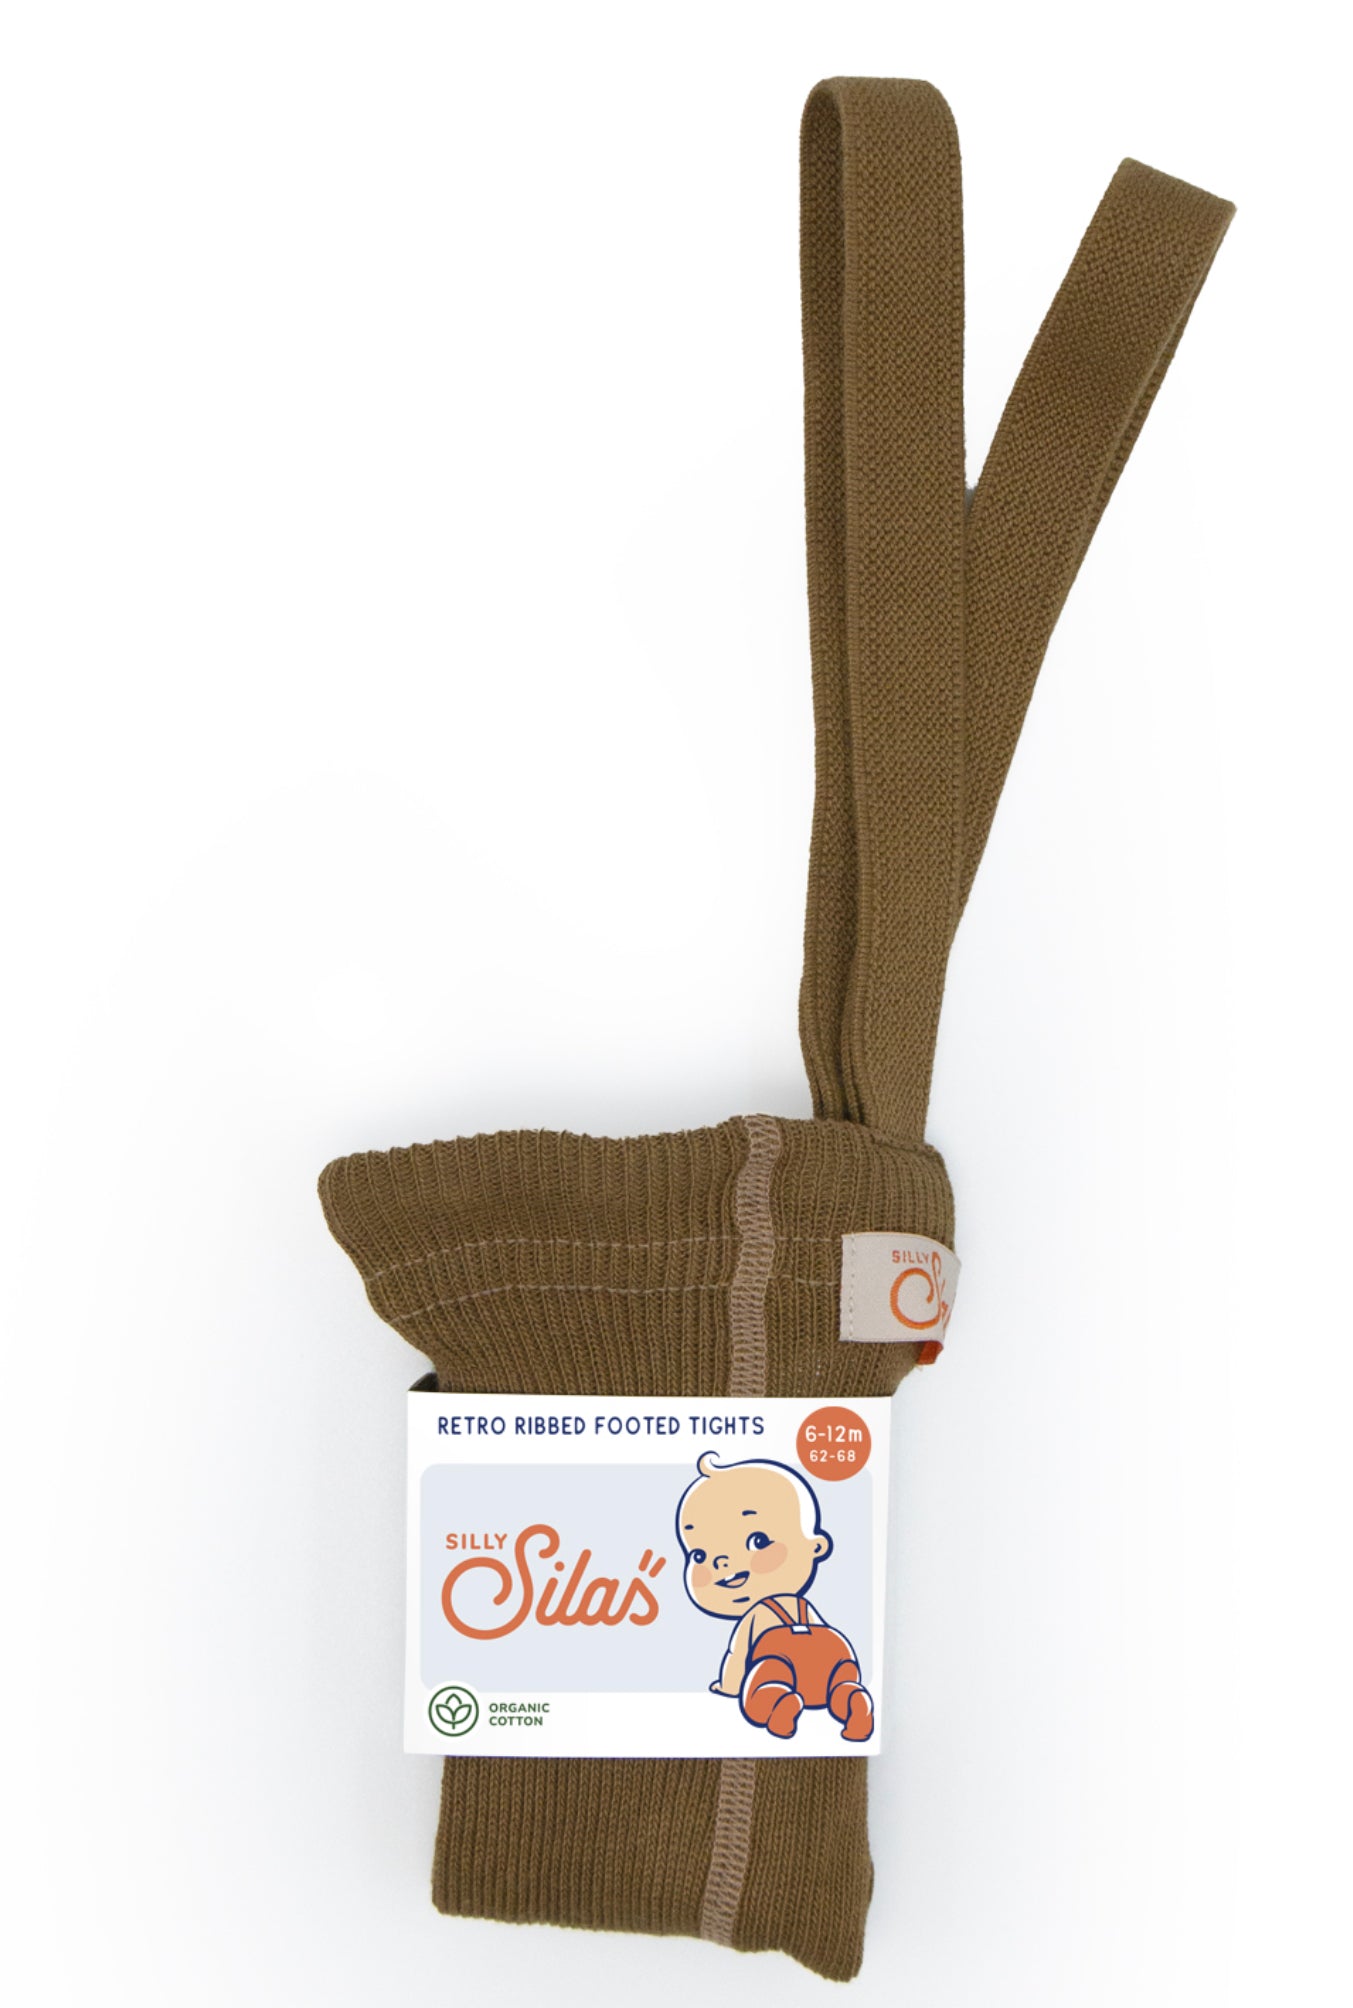 Silly silas retro tights, retro tights with braces, acorn brown silly silas tights, silly silas nottingham stockist, midlands baby shop, independent kids shop, kids tights